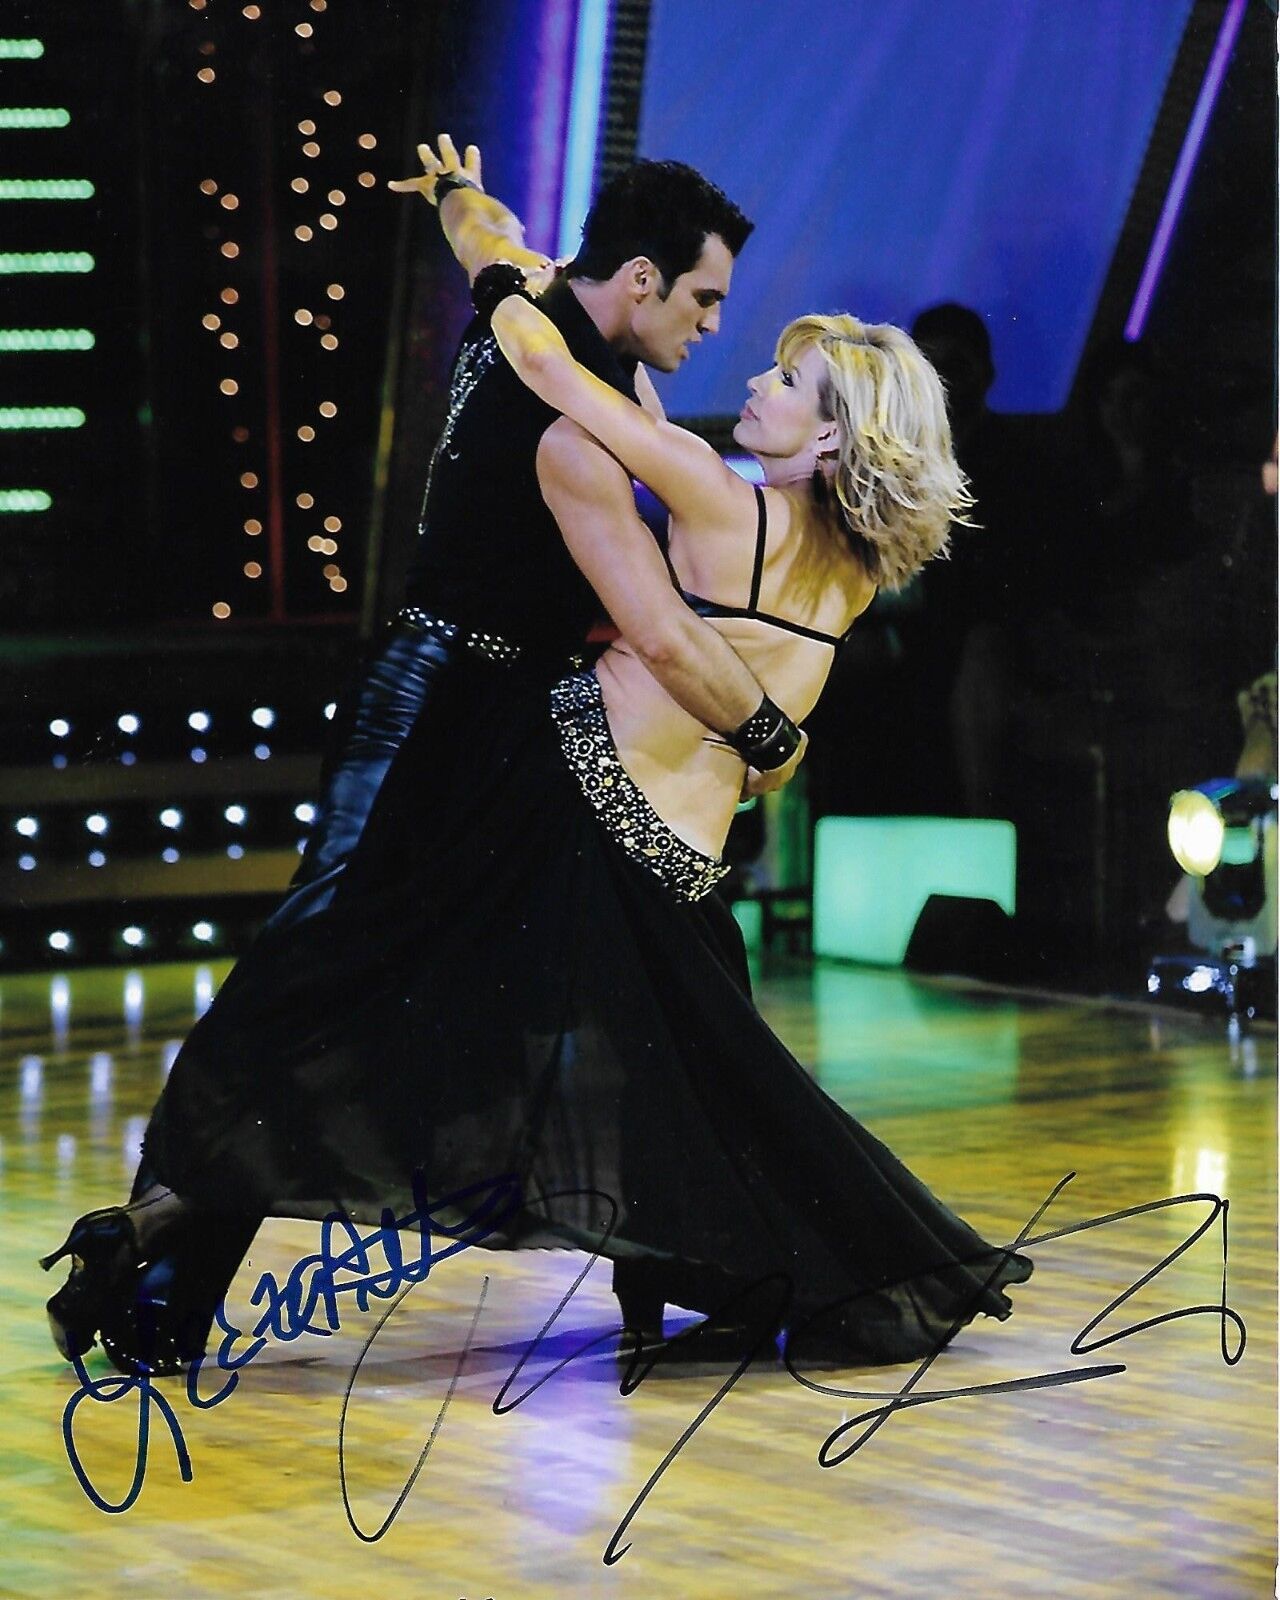 DANCING WITH THE STARS AUTOGRAPHED Photo Poster painting SIGNED 8X10 #2 TONY LEEZA GIBBONS